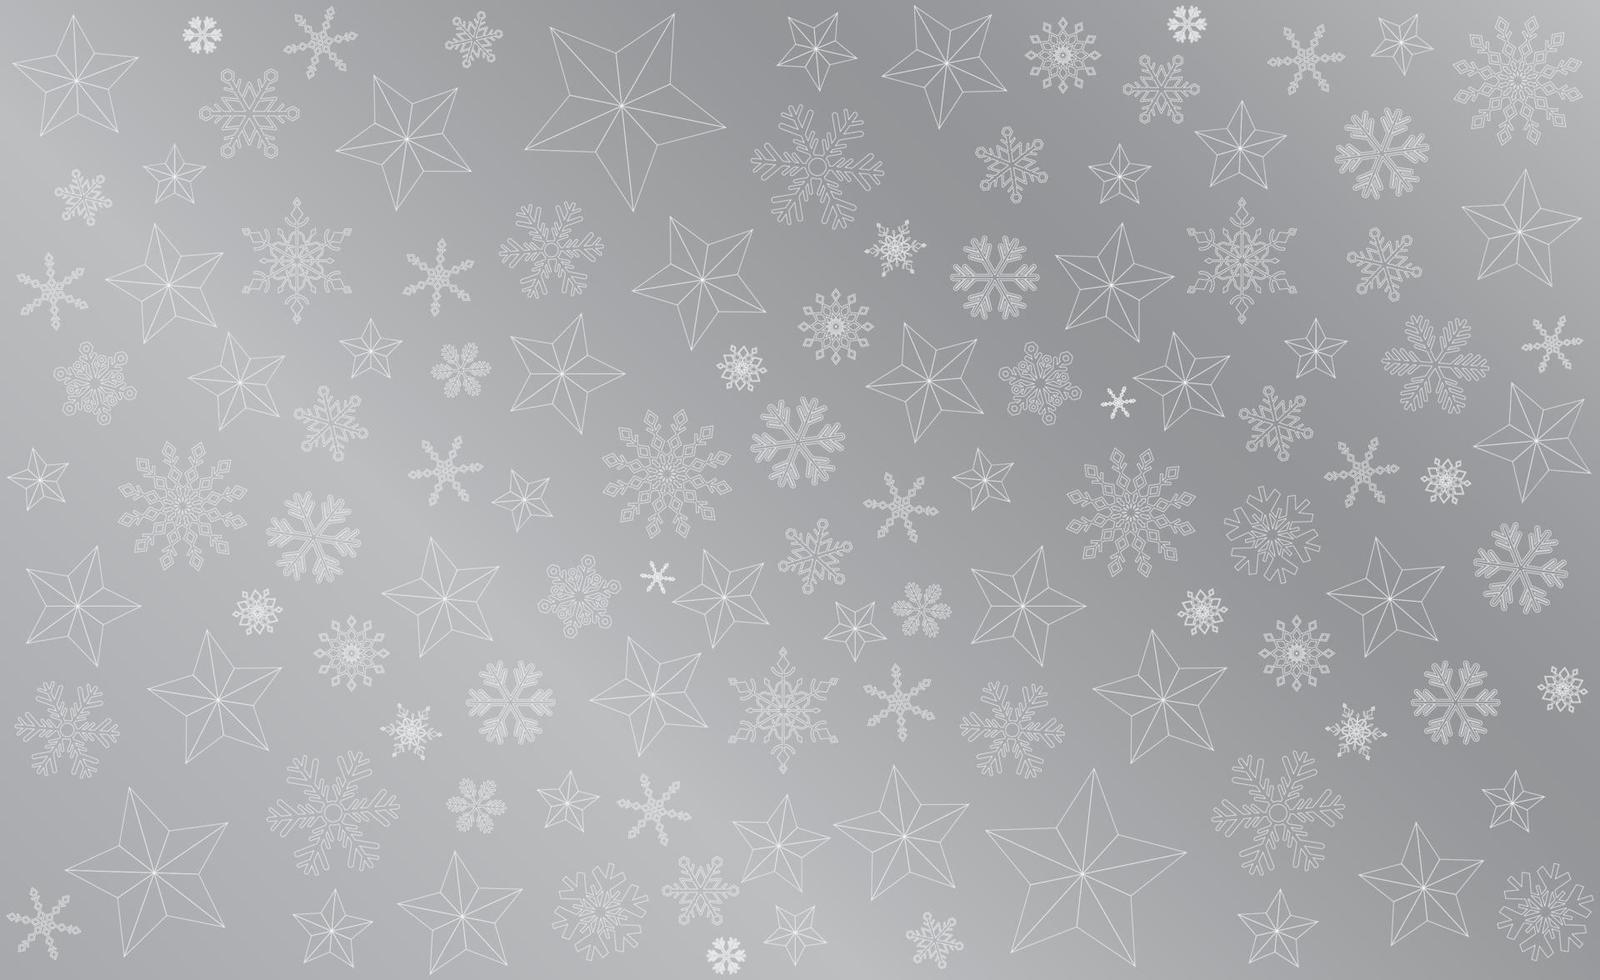 Illustration outline of stars with snowflakes on silver background. Luxury christmas elements pattern. vector